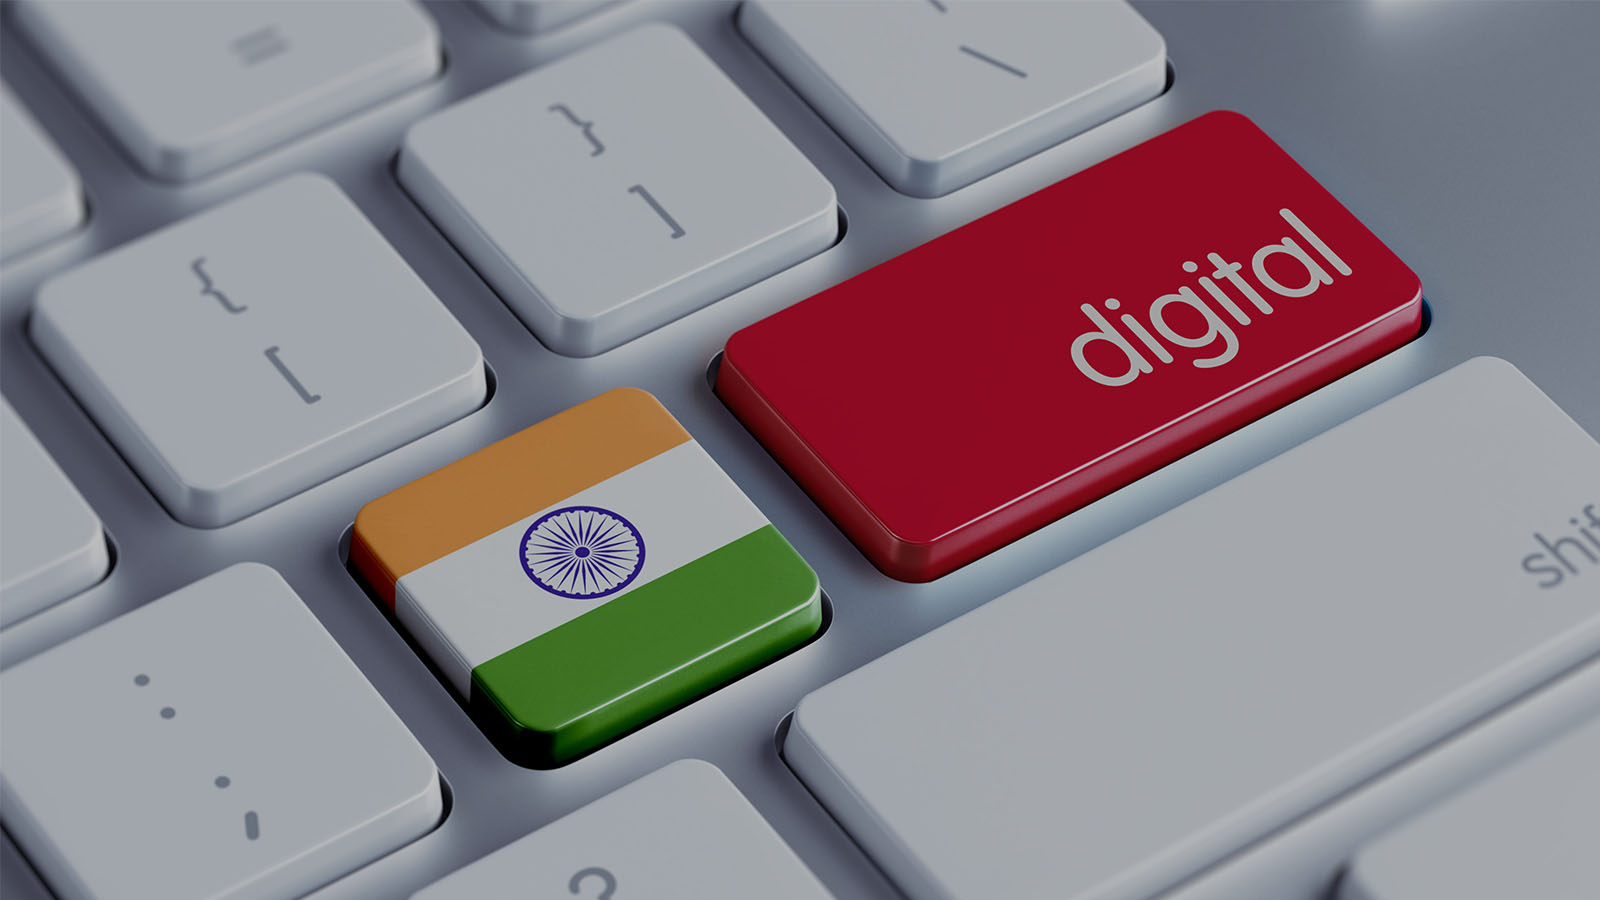 One lakh villages to go digital over next five years